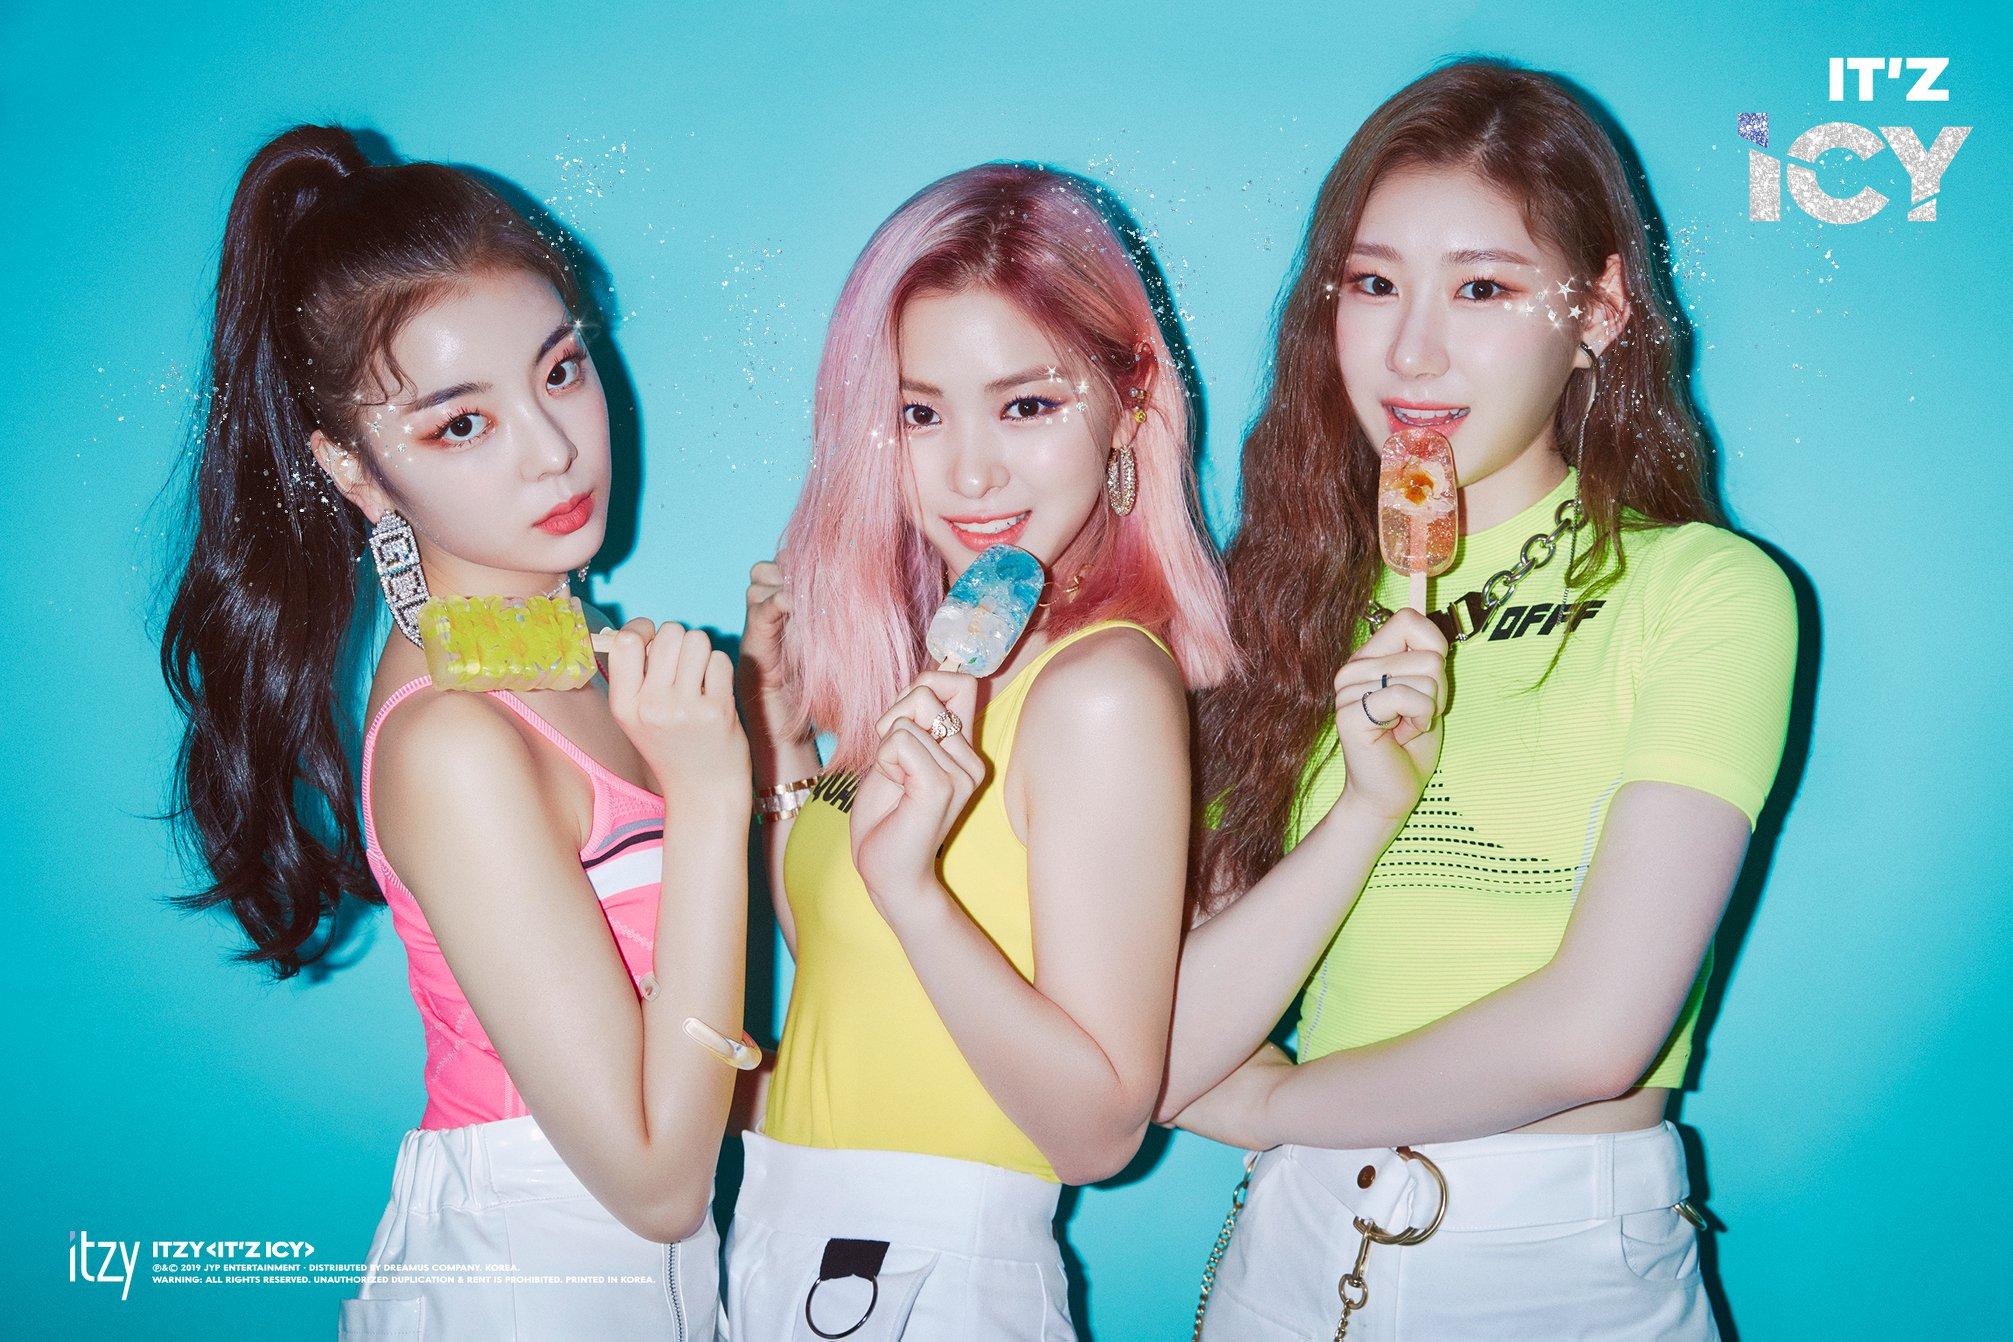 ITZY [IT'z ICY] Teaser Image